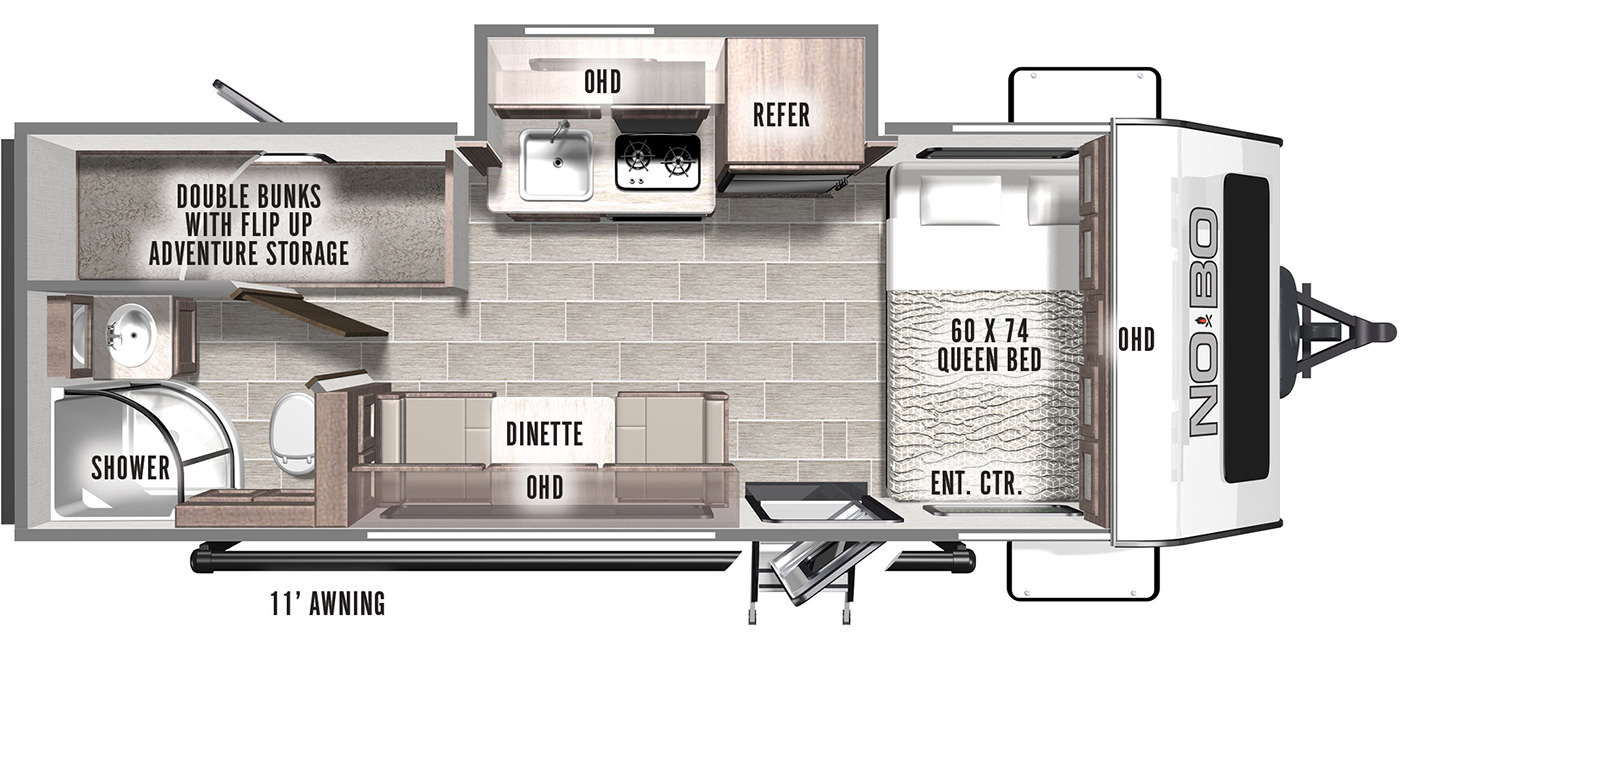 The NB16.6 has one slide out on the off-door side and one entry door . There is an 11 foot exterior awning on the door side. The interior is an open concept with: a side facing 60 x 74 queen bed in the front with overhead cabinetry; a off-doorside slide out containing a single basin sink, cook top stove, refrigerator, overhead cabinet; a dinette across from the slide out; a bathroom with corner shower, toilet, vanity and medicine cabinet in the door side rear corner; and double bunks with flip up adventure storage in the off-door side rear corner. 